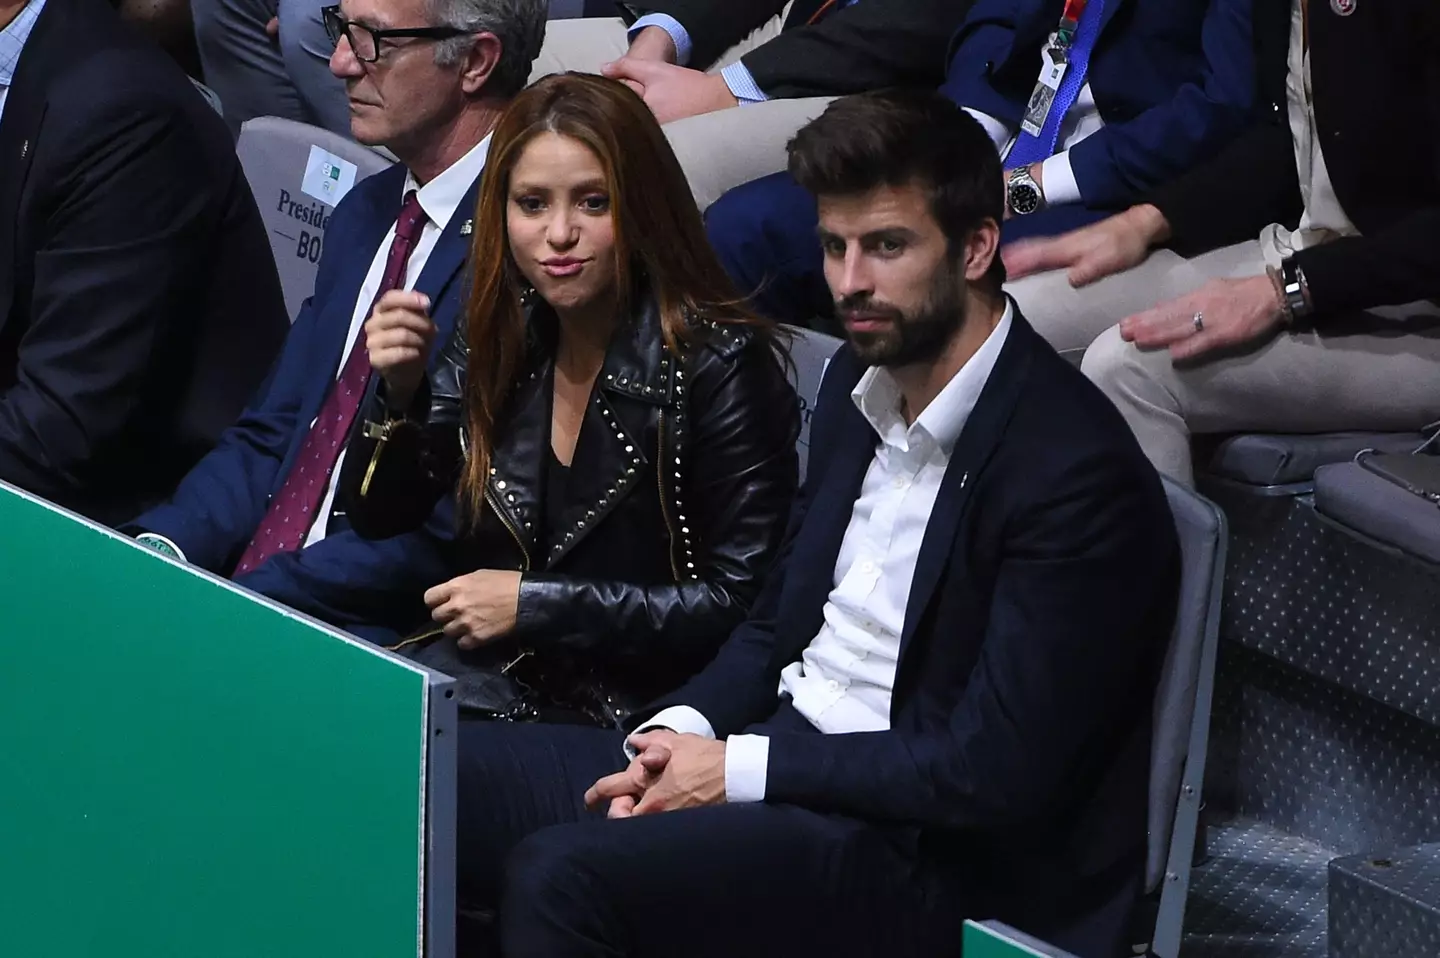 Shakira and Pique pictured together during their relationship. (Image